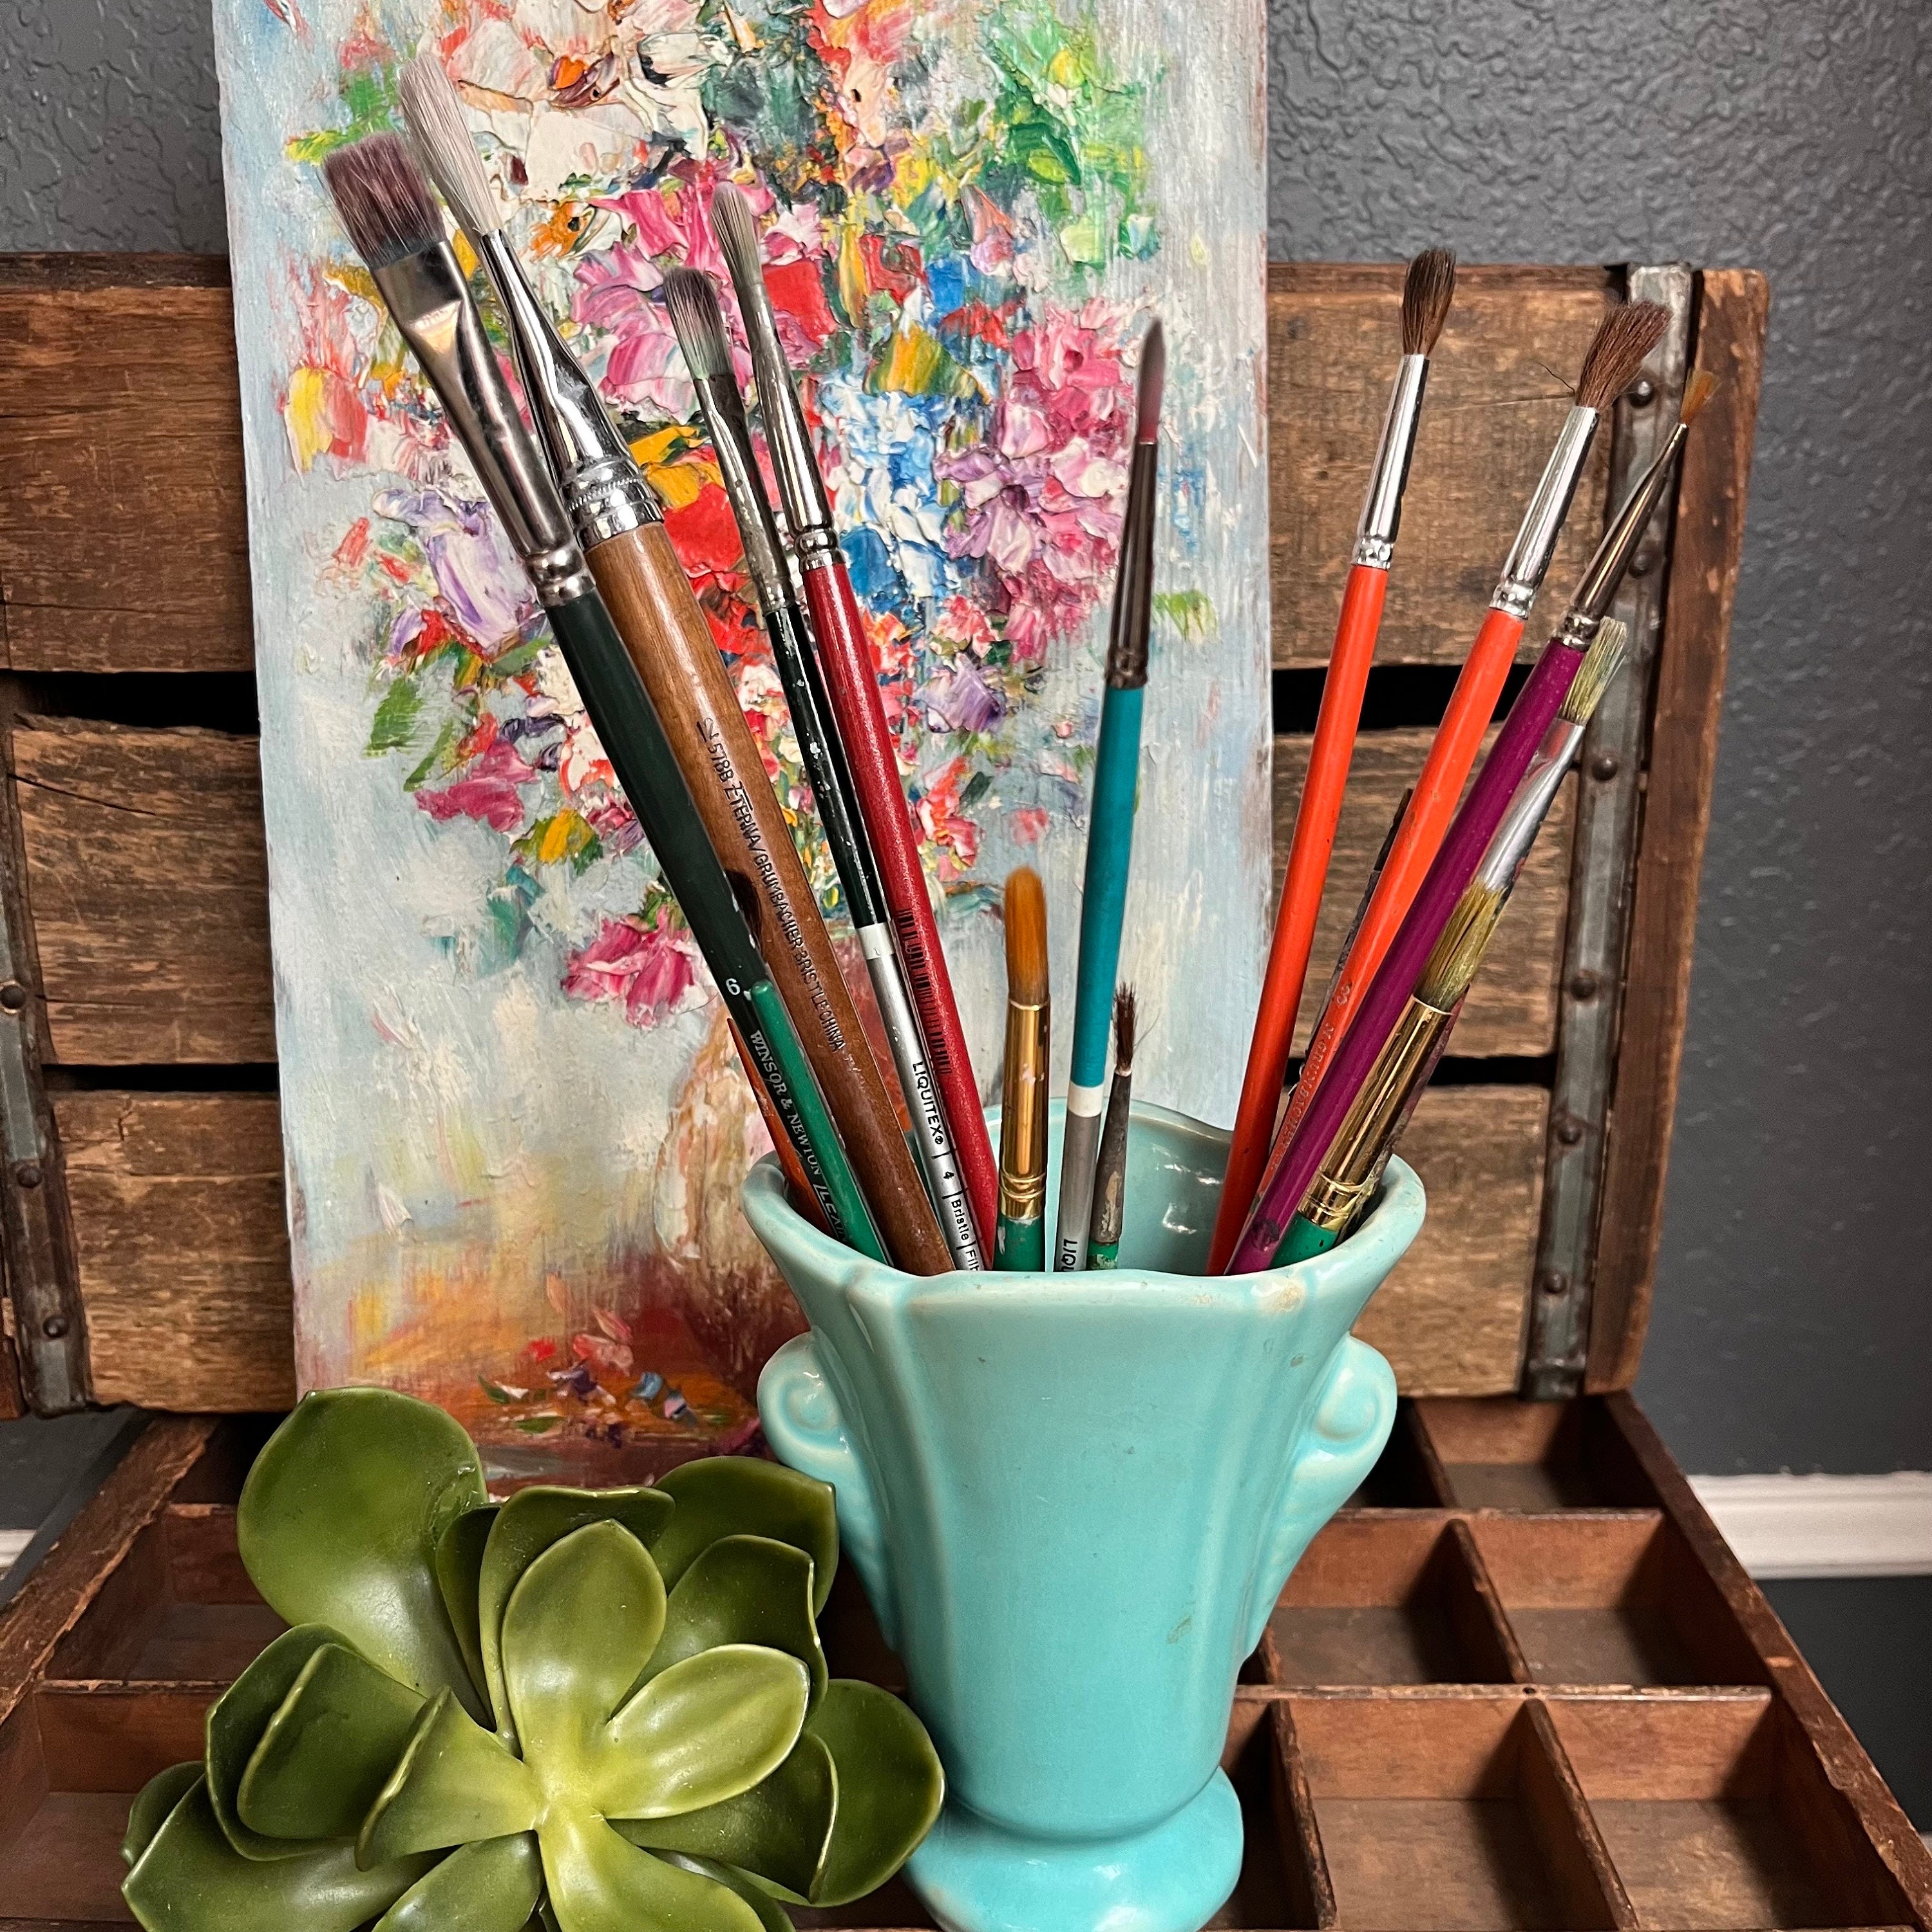 Pot Of Old Paint Brushes With Tube Of Paint Wall Art, Canvas